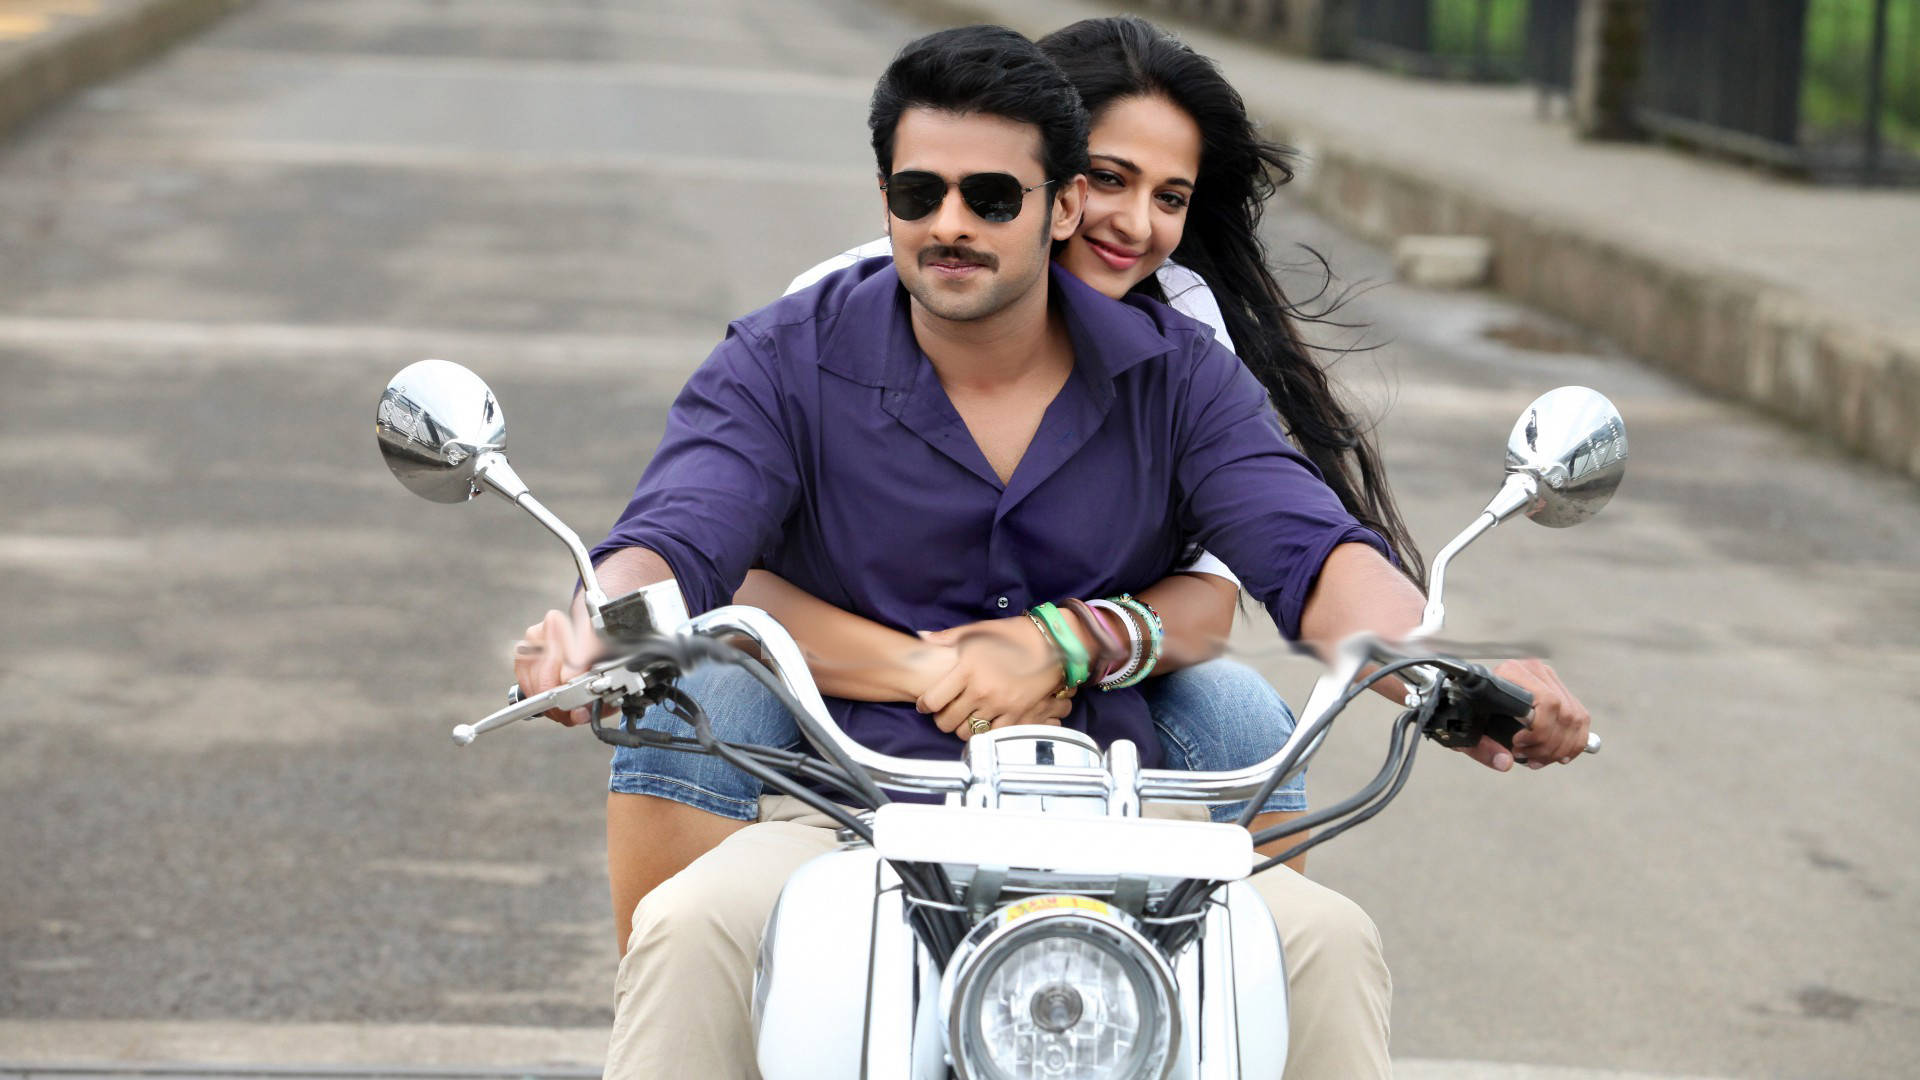 Prabhas Hd Driving With A Woman Wallpaper